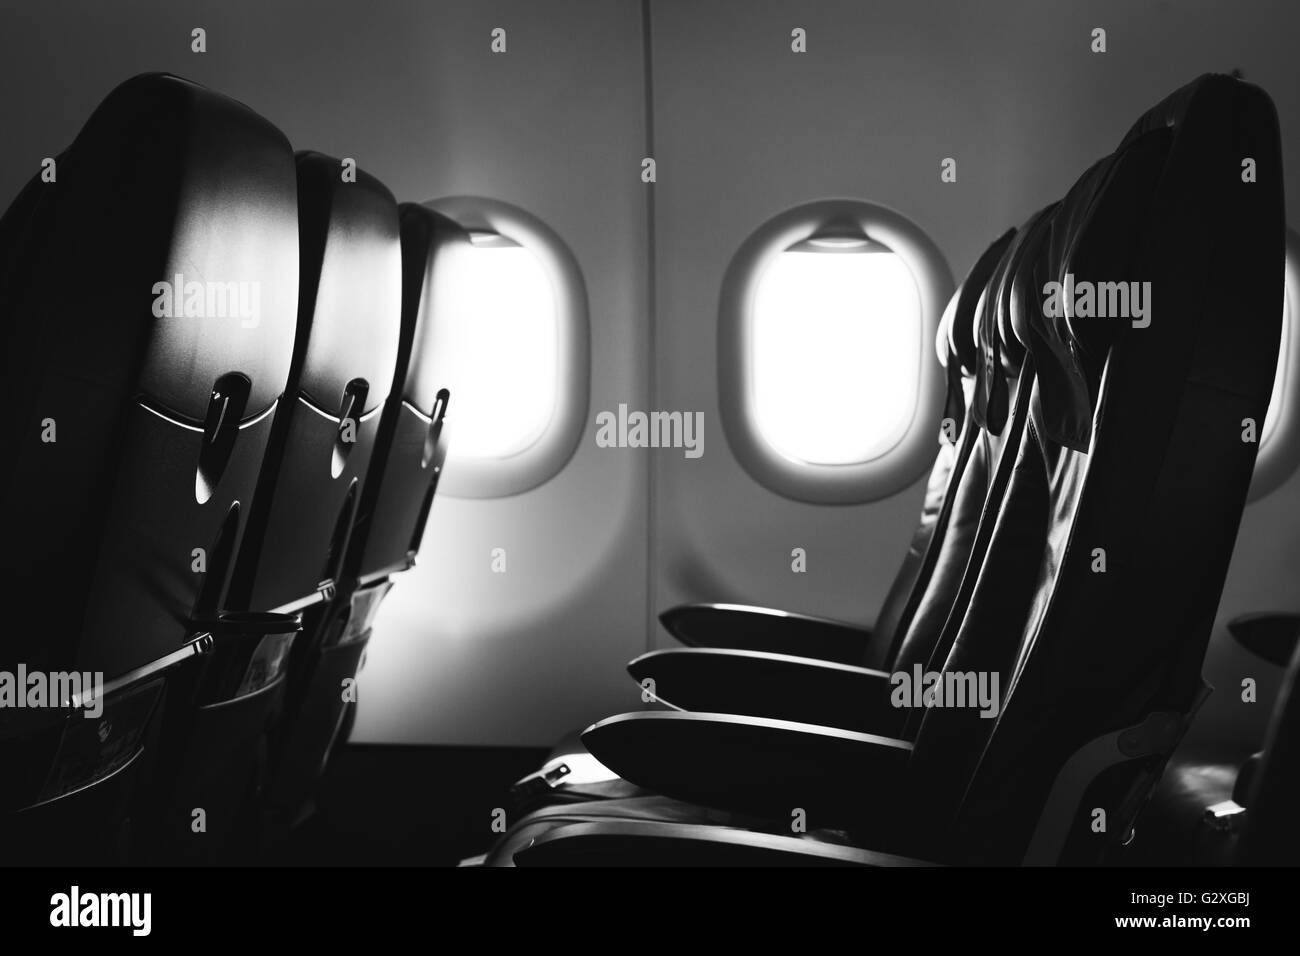 Airplane seat and window inside an aircraft Stock Photo